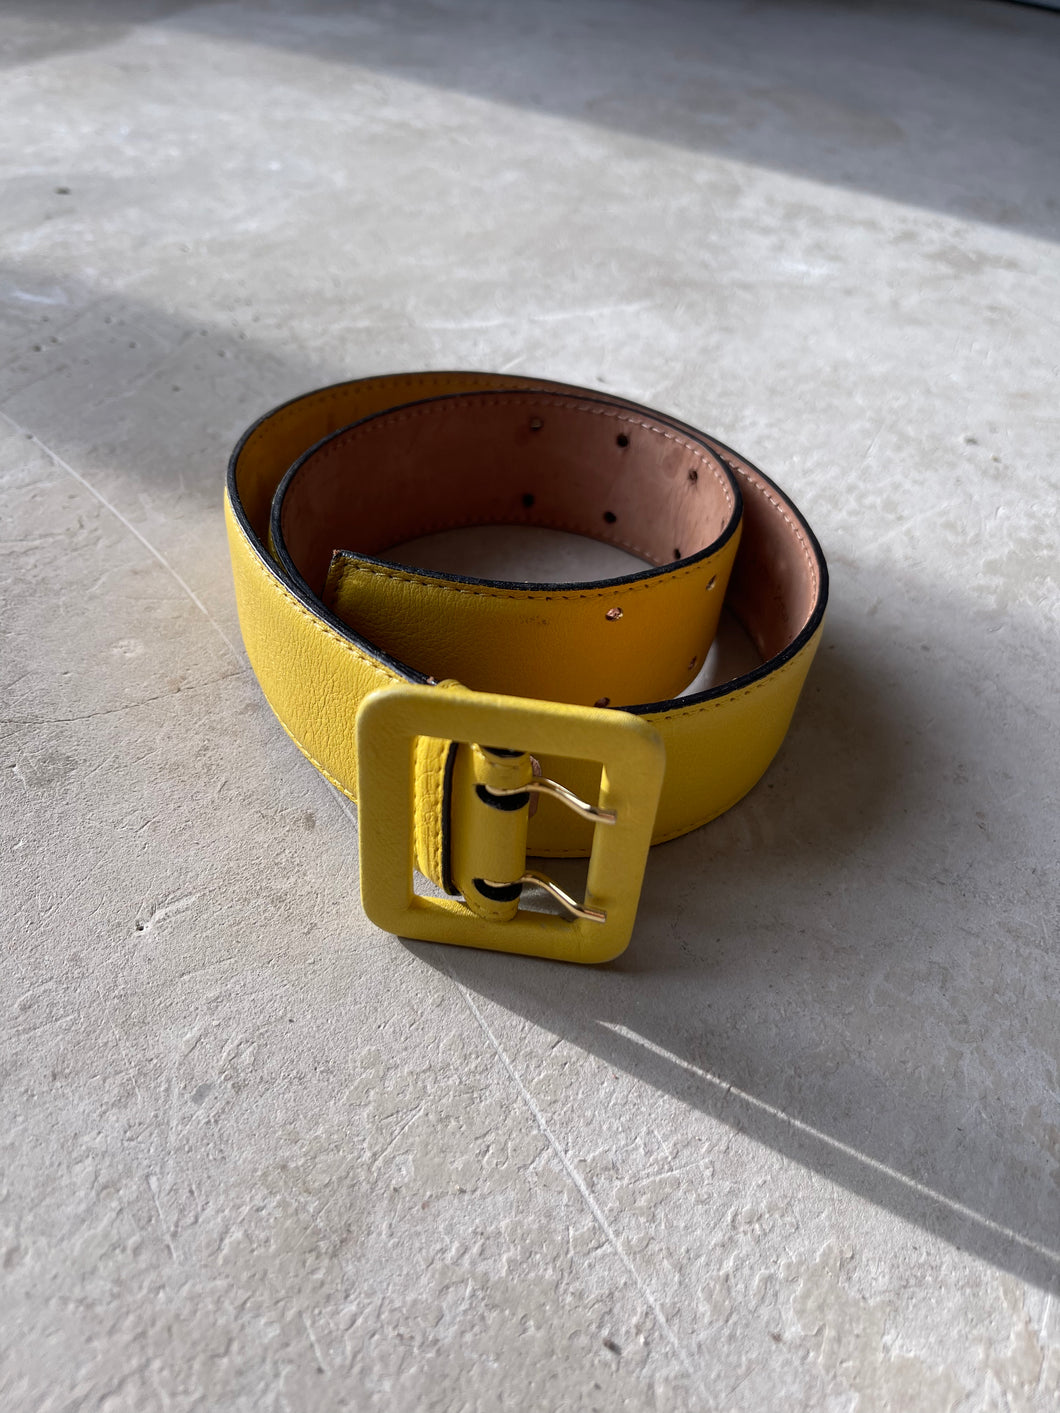 Other Stories Leather Belt